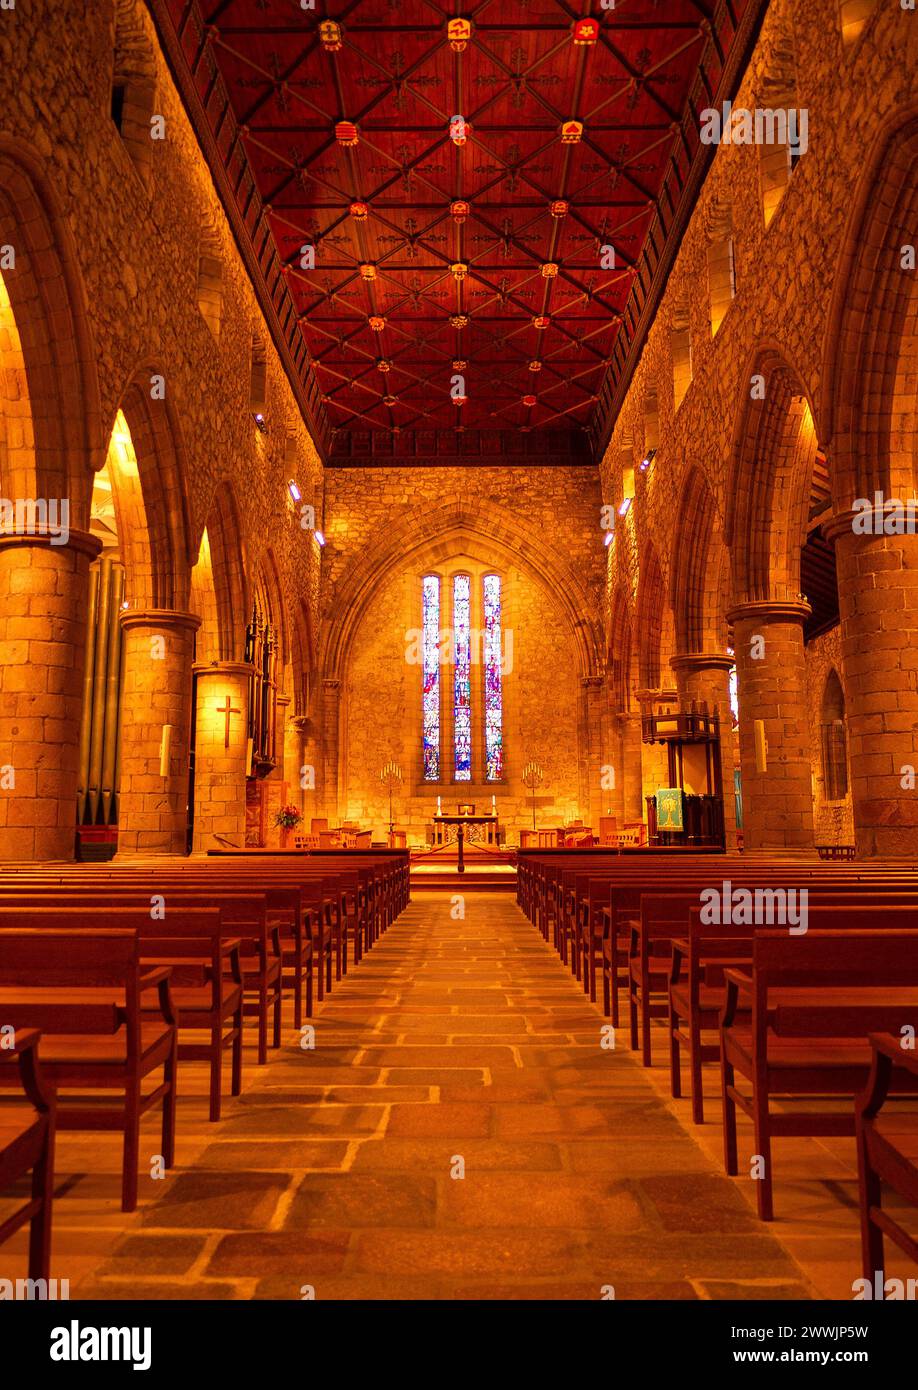 Well-lit interior of St Machar's Cathedral church, The Chanonry, Old Aberdeen, Aberdeen, Aberdeenshire, Scotland, UK Stock Photo